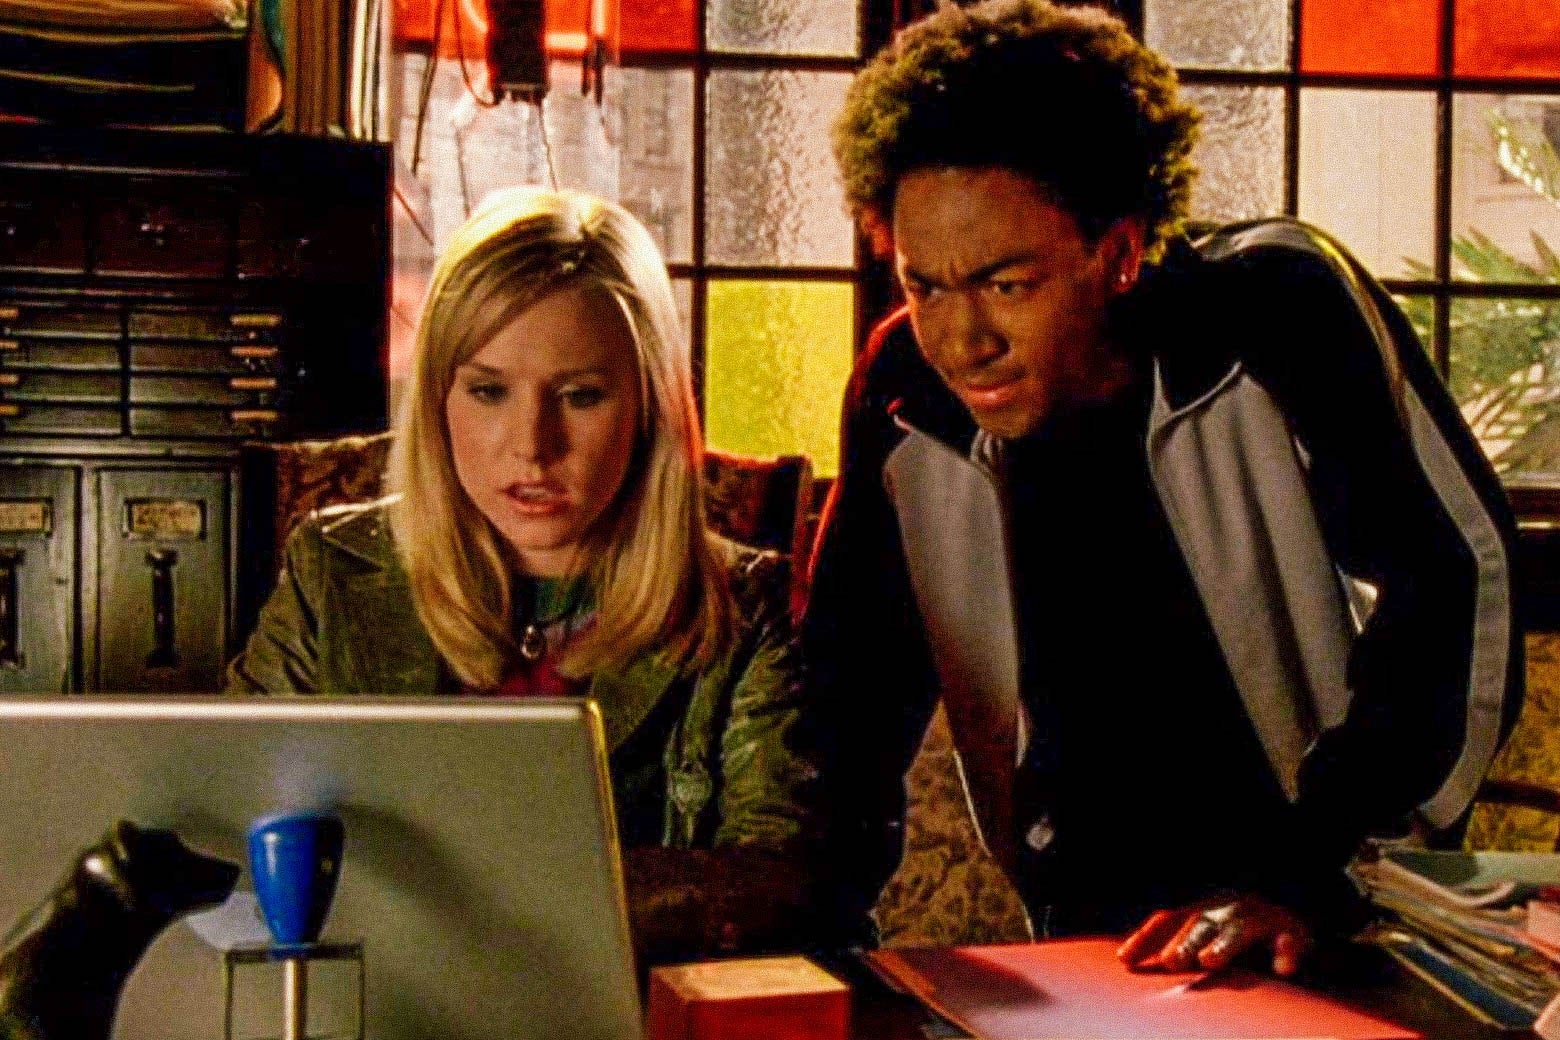 Bell as Veronica working at a computer and Daggs as Wallace looking over her shoulder.